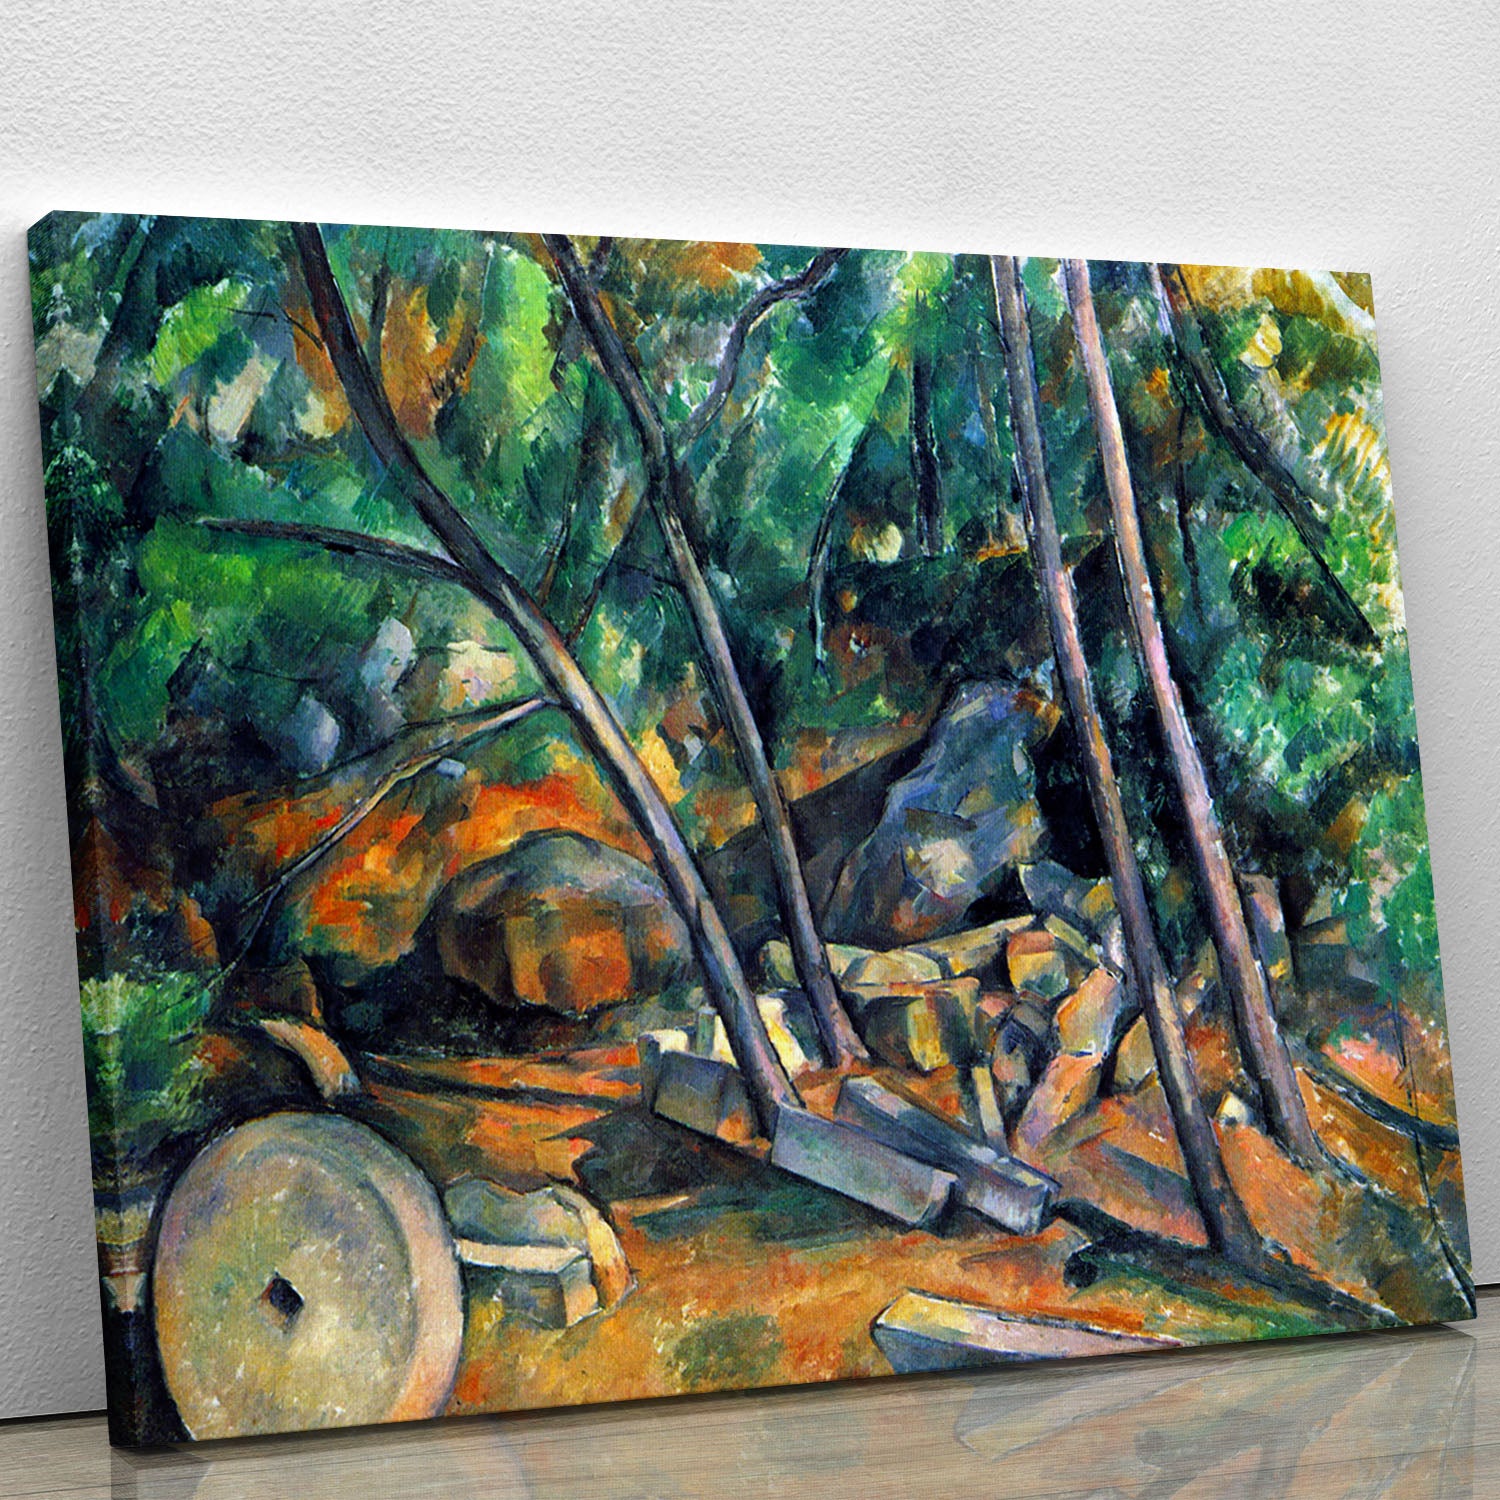 Mill Stone by Cezanne Canvas Print or Poster - Canvas Art Rocks - 1